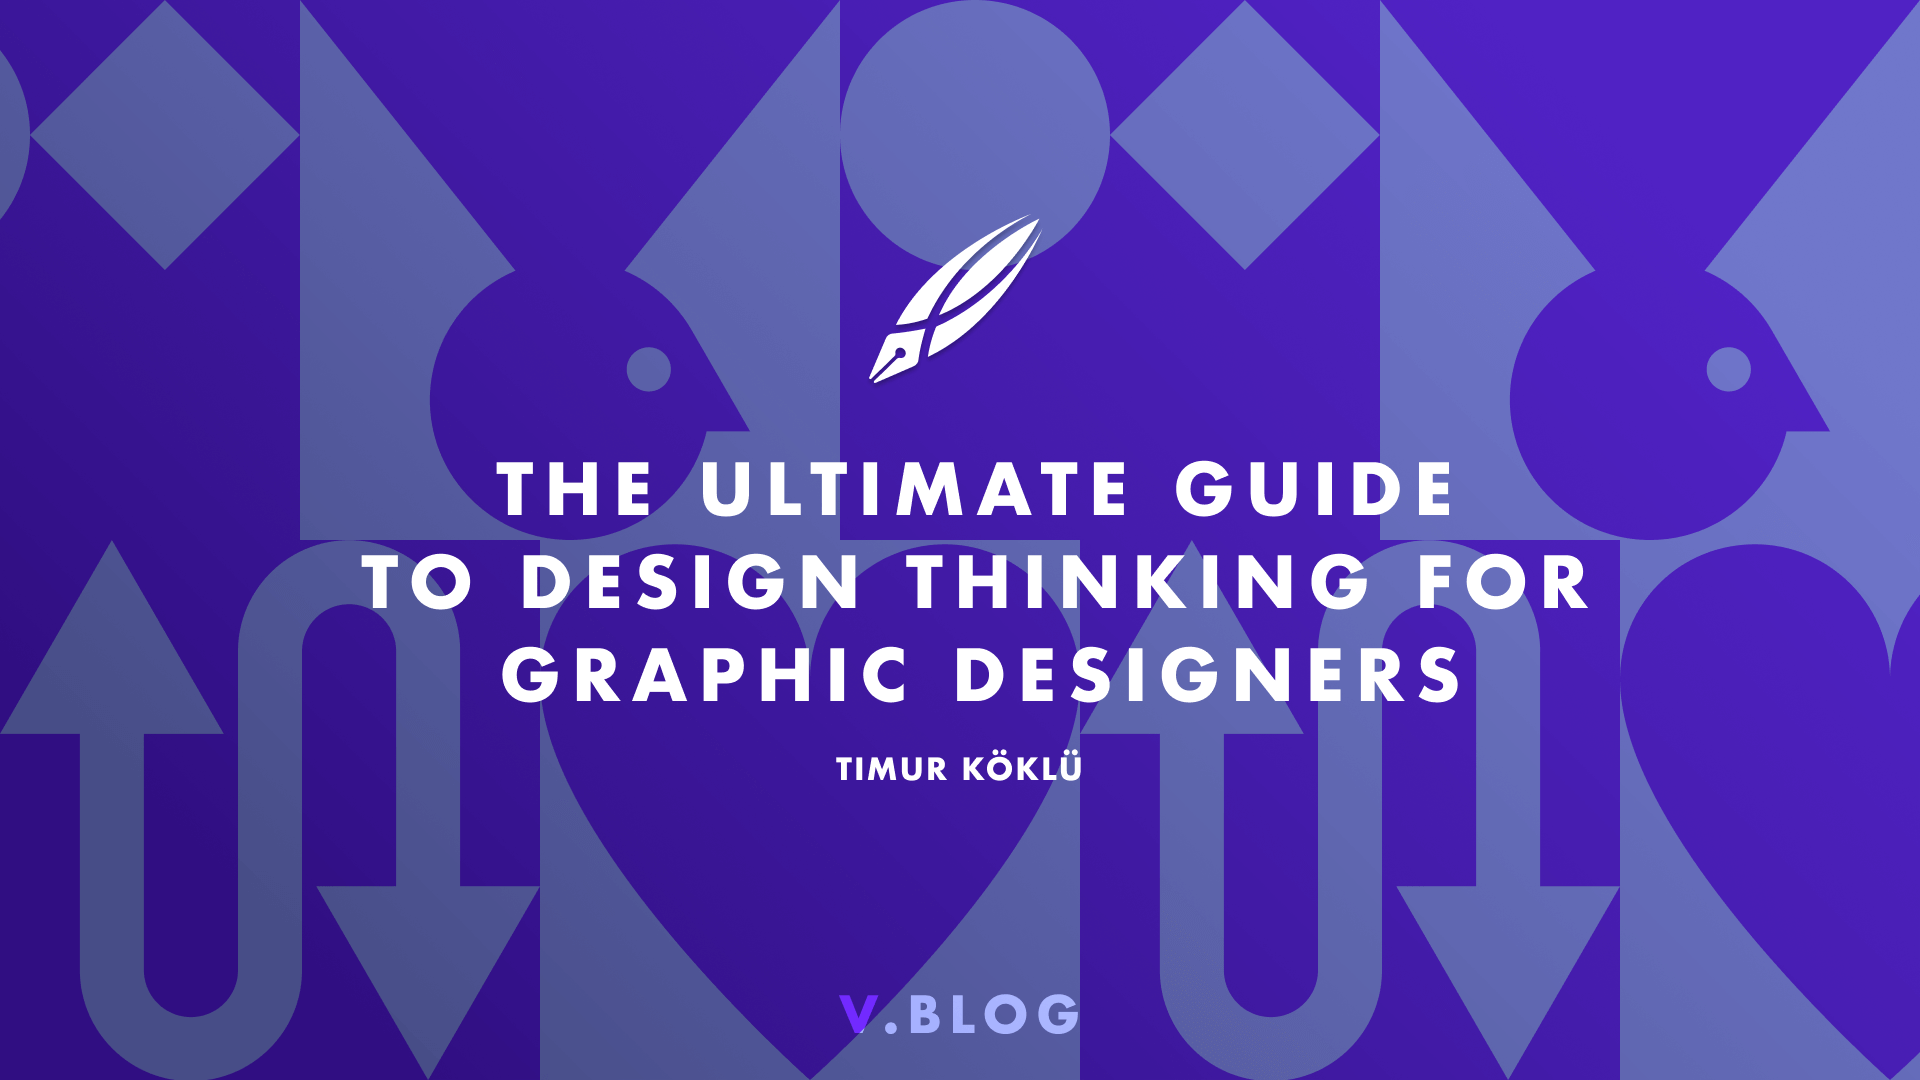 The Ultimate Guide To Design Thinking For Graphic Designers